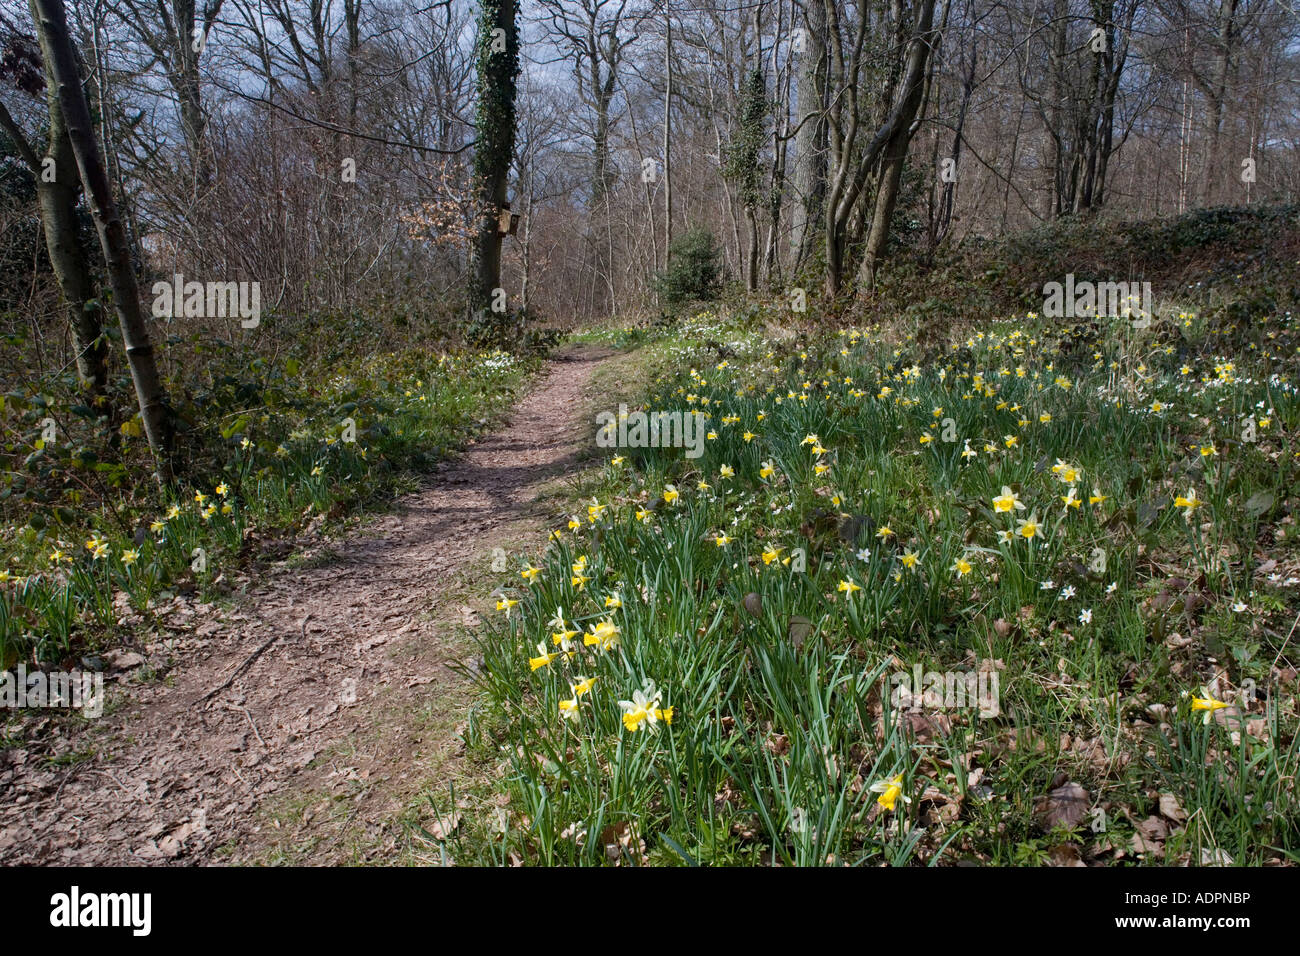 Poetic Wood High Resolution Stock Photography and Images - Alamy